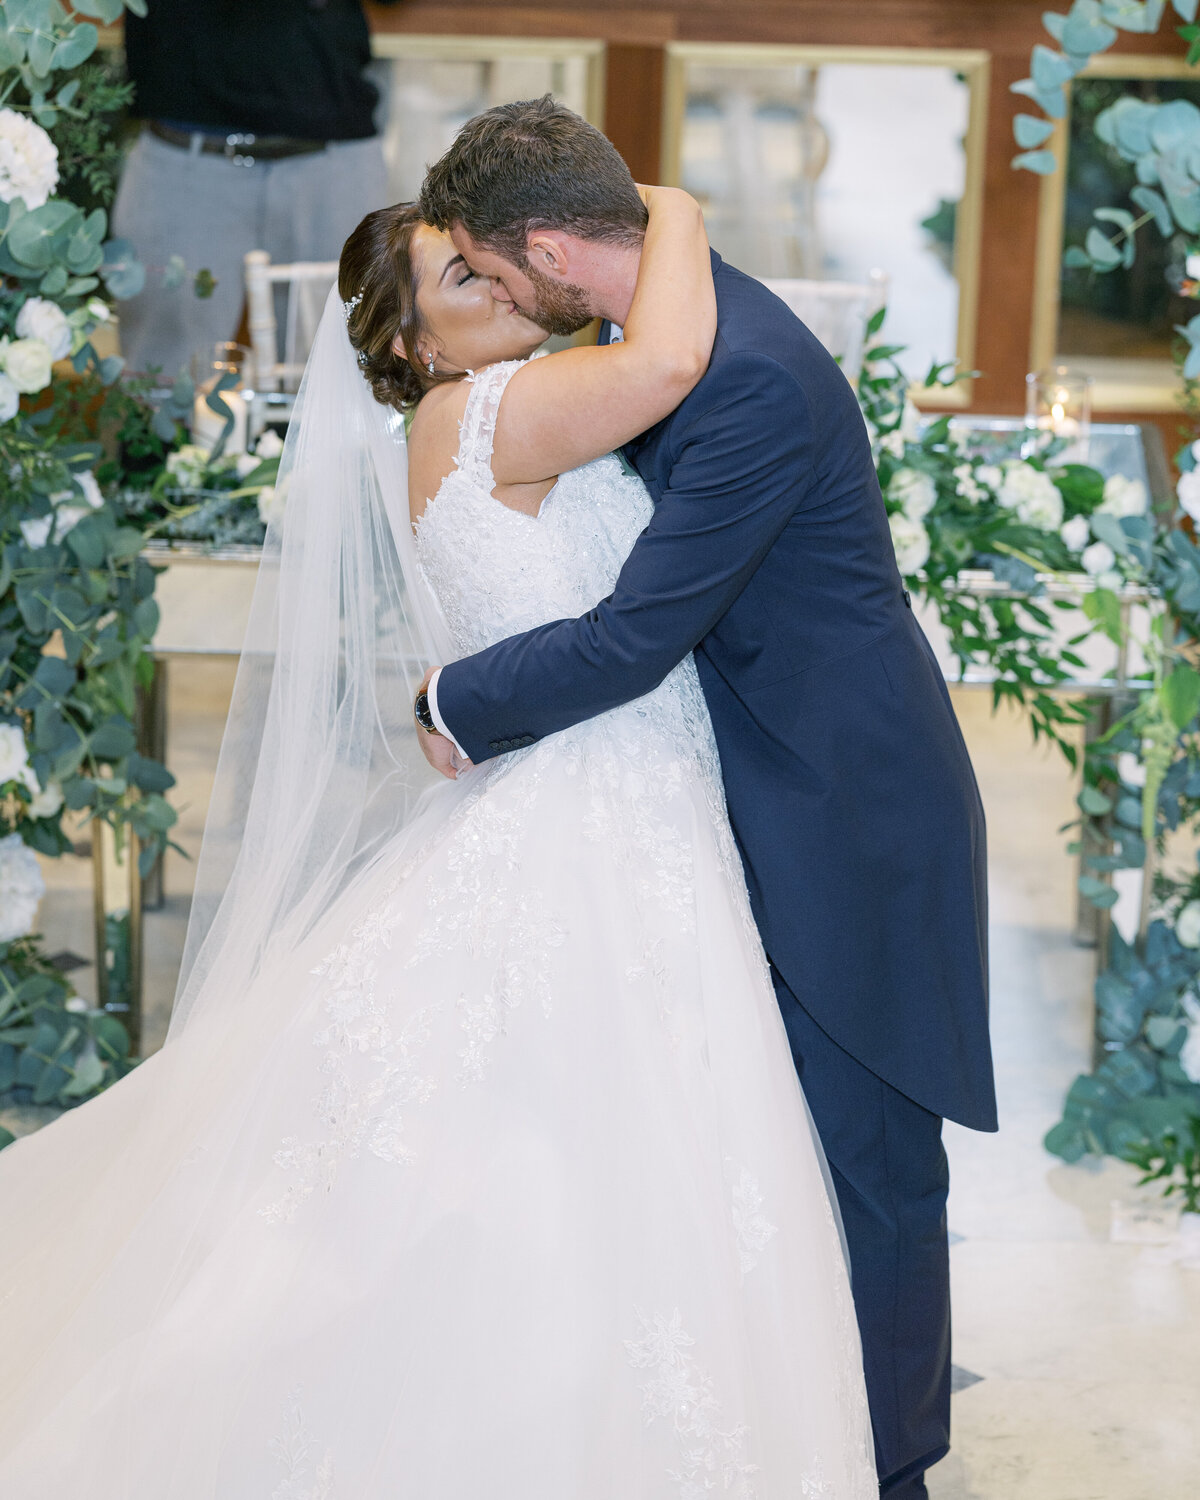 First kiss in chapel wedding ceremony